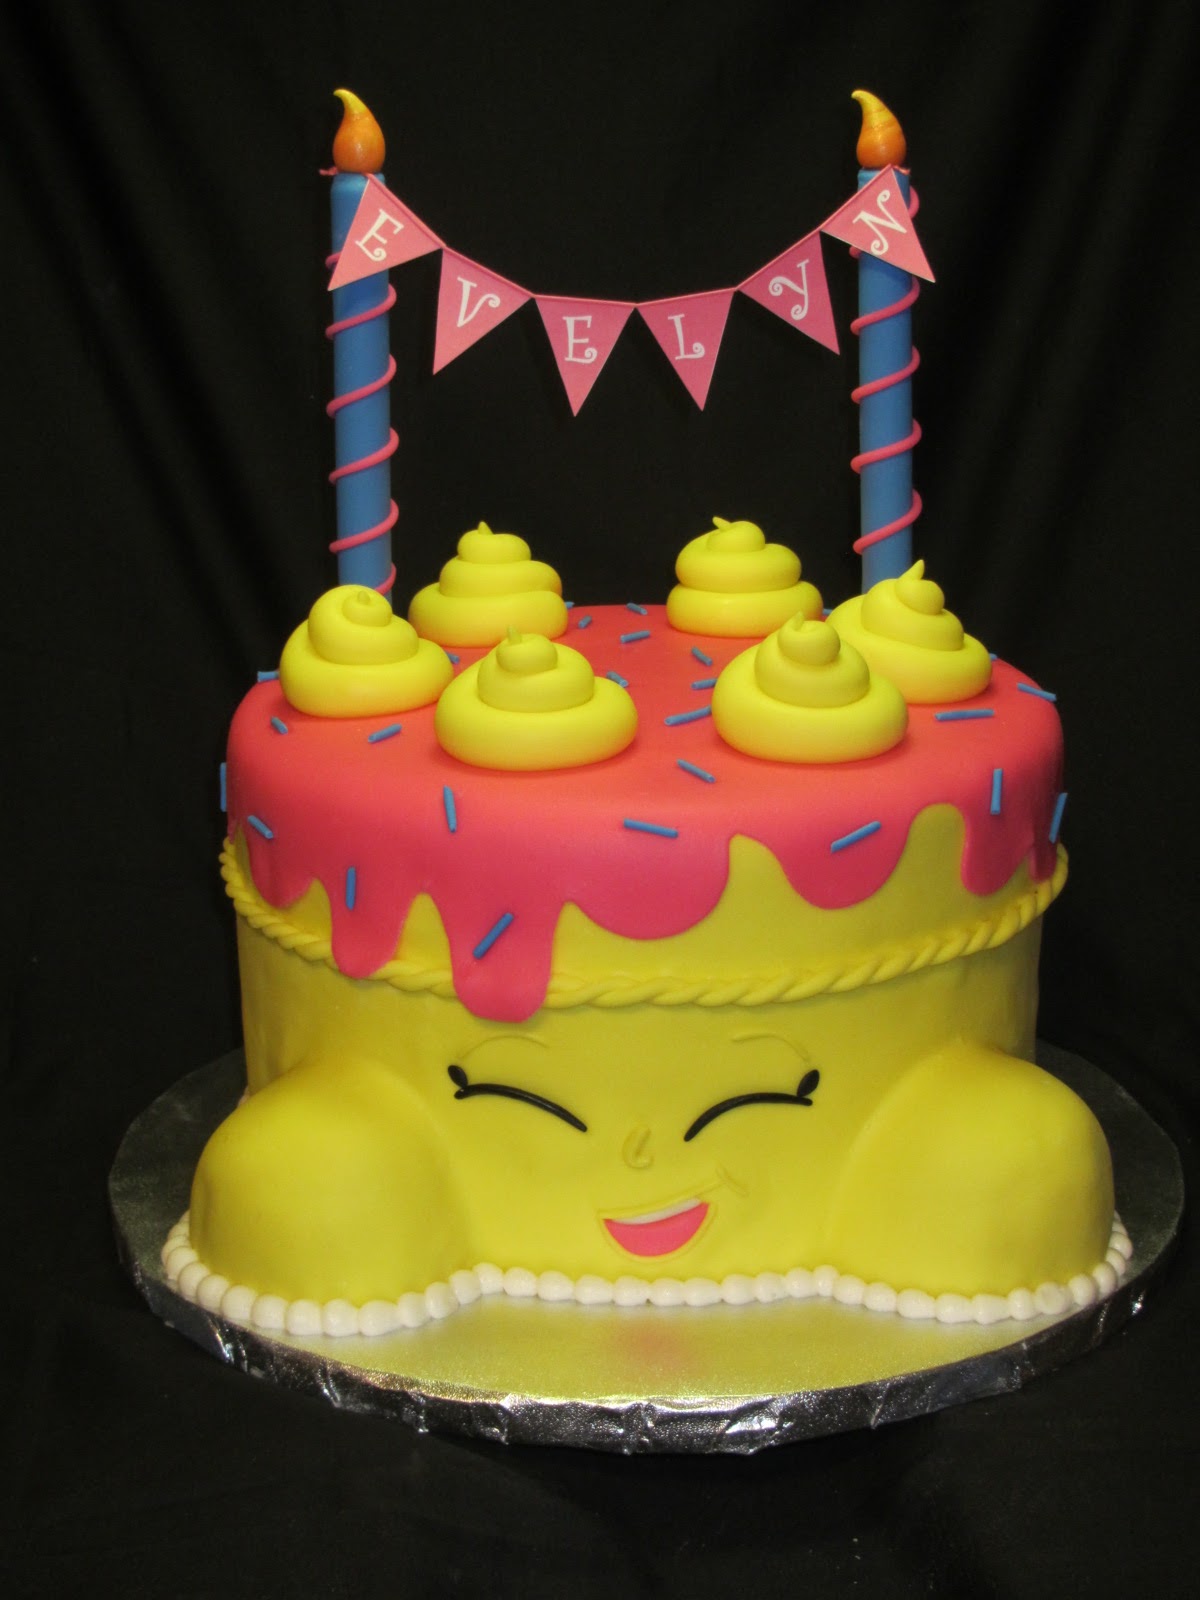 Cakes by Kristen H.: Shopkins cake